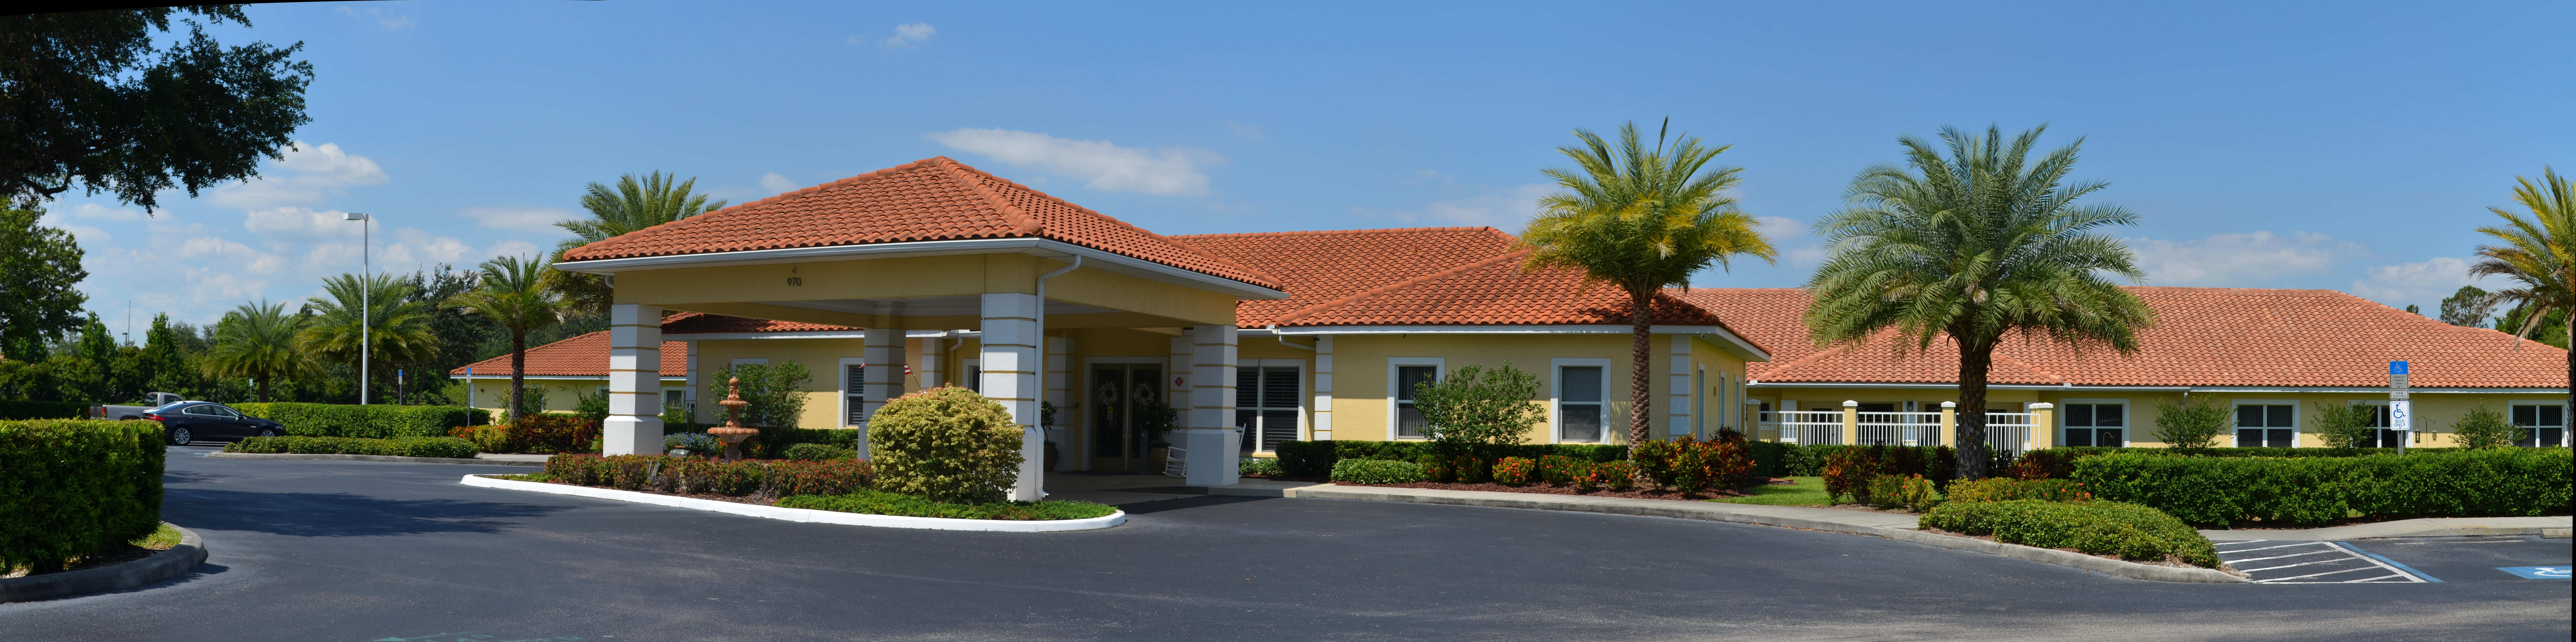 Cypress Creek Assisted Living & Memory Care Residence 